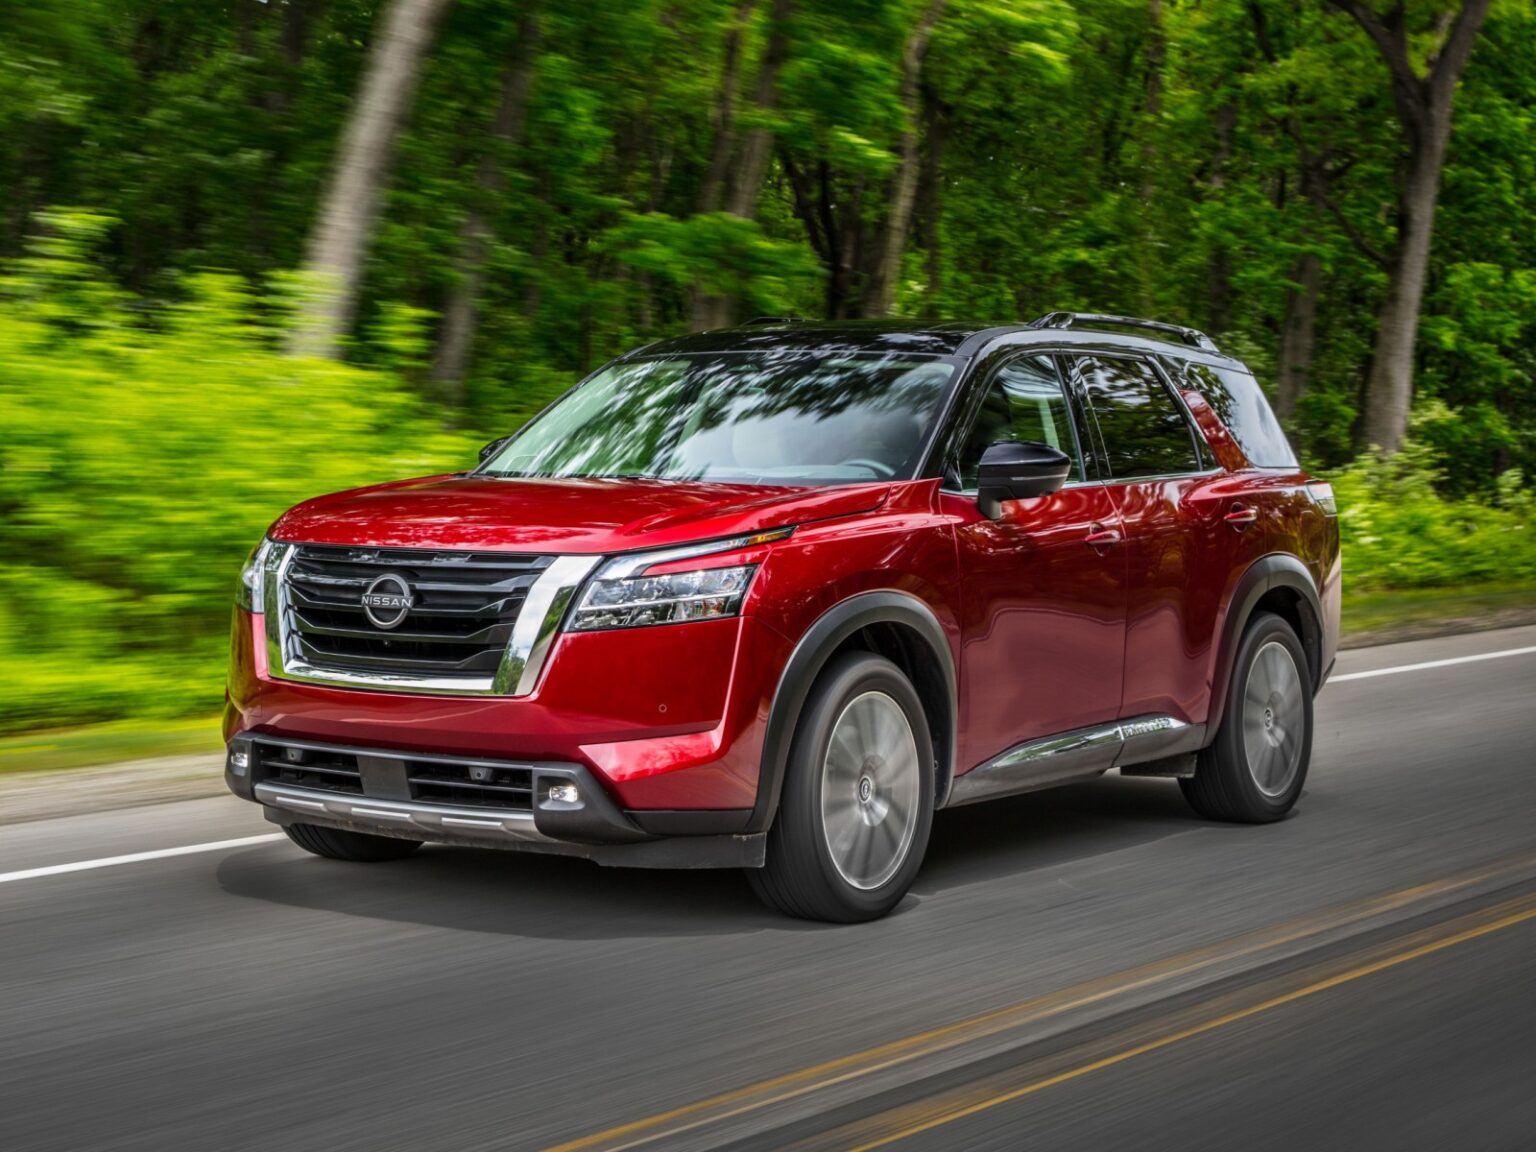 Top 10 Most Reliable SUVs Under 40K To Buy In 2023 21Motoring